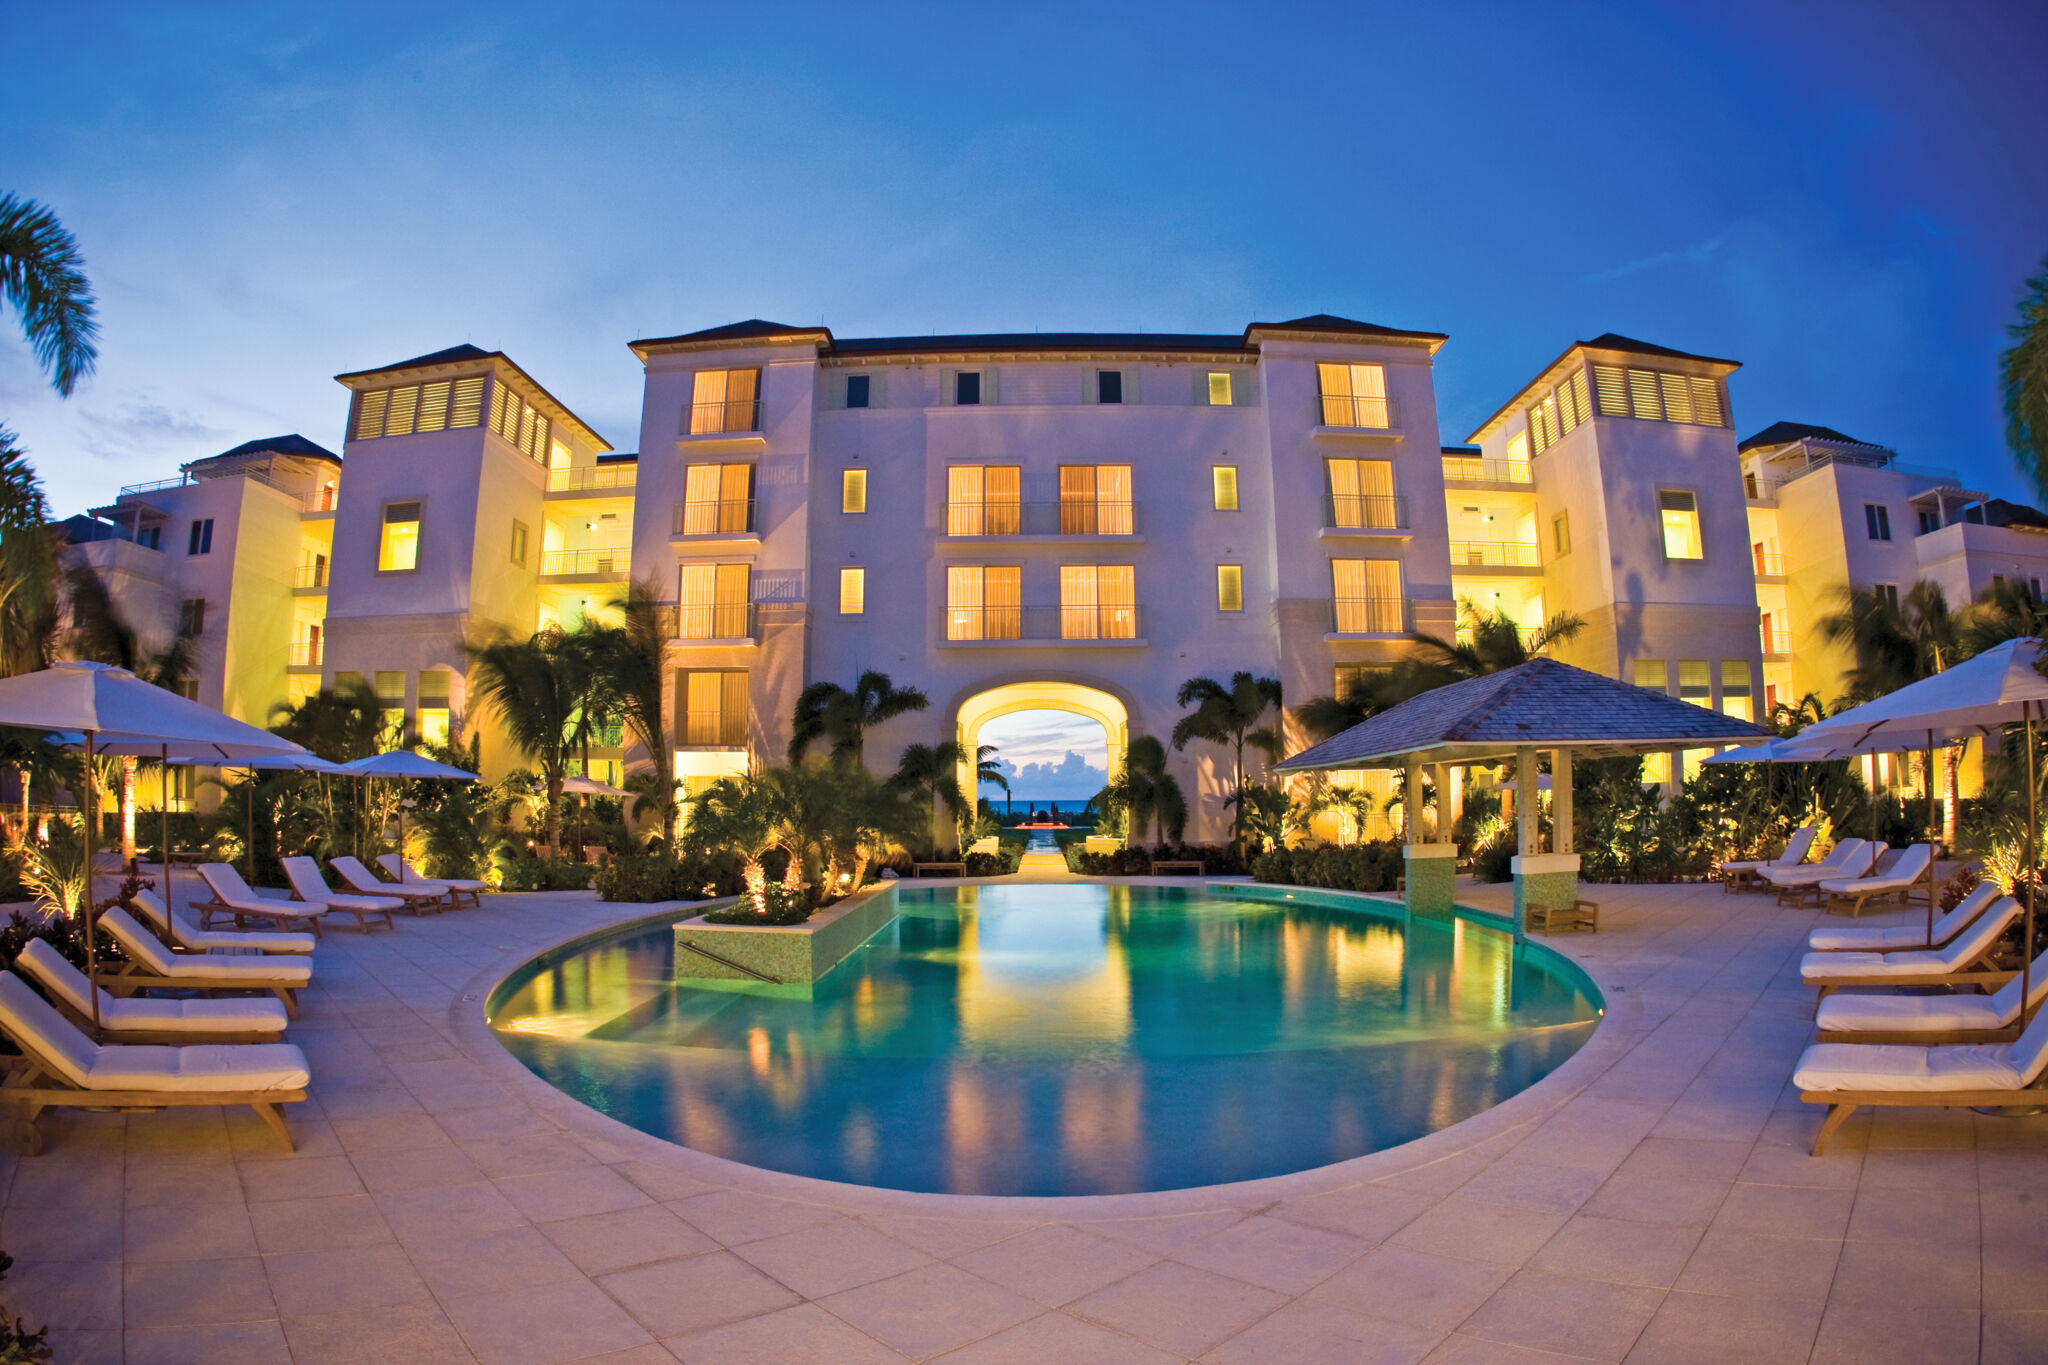 West Bay Club | Visit Turks and Caicos Islands